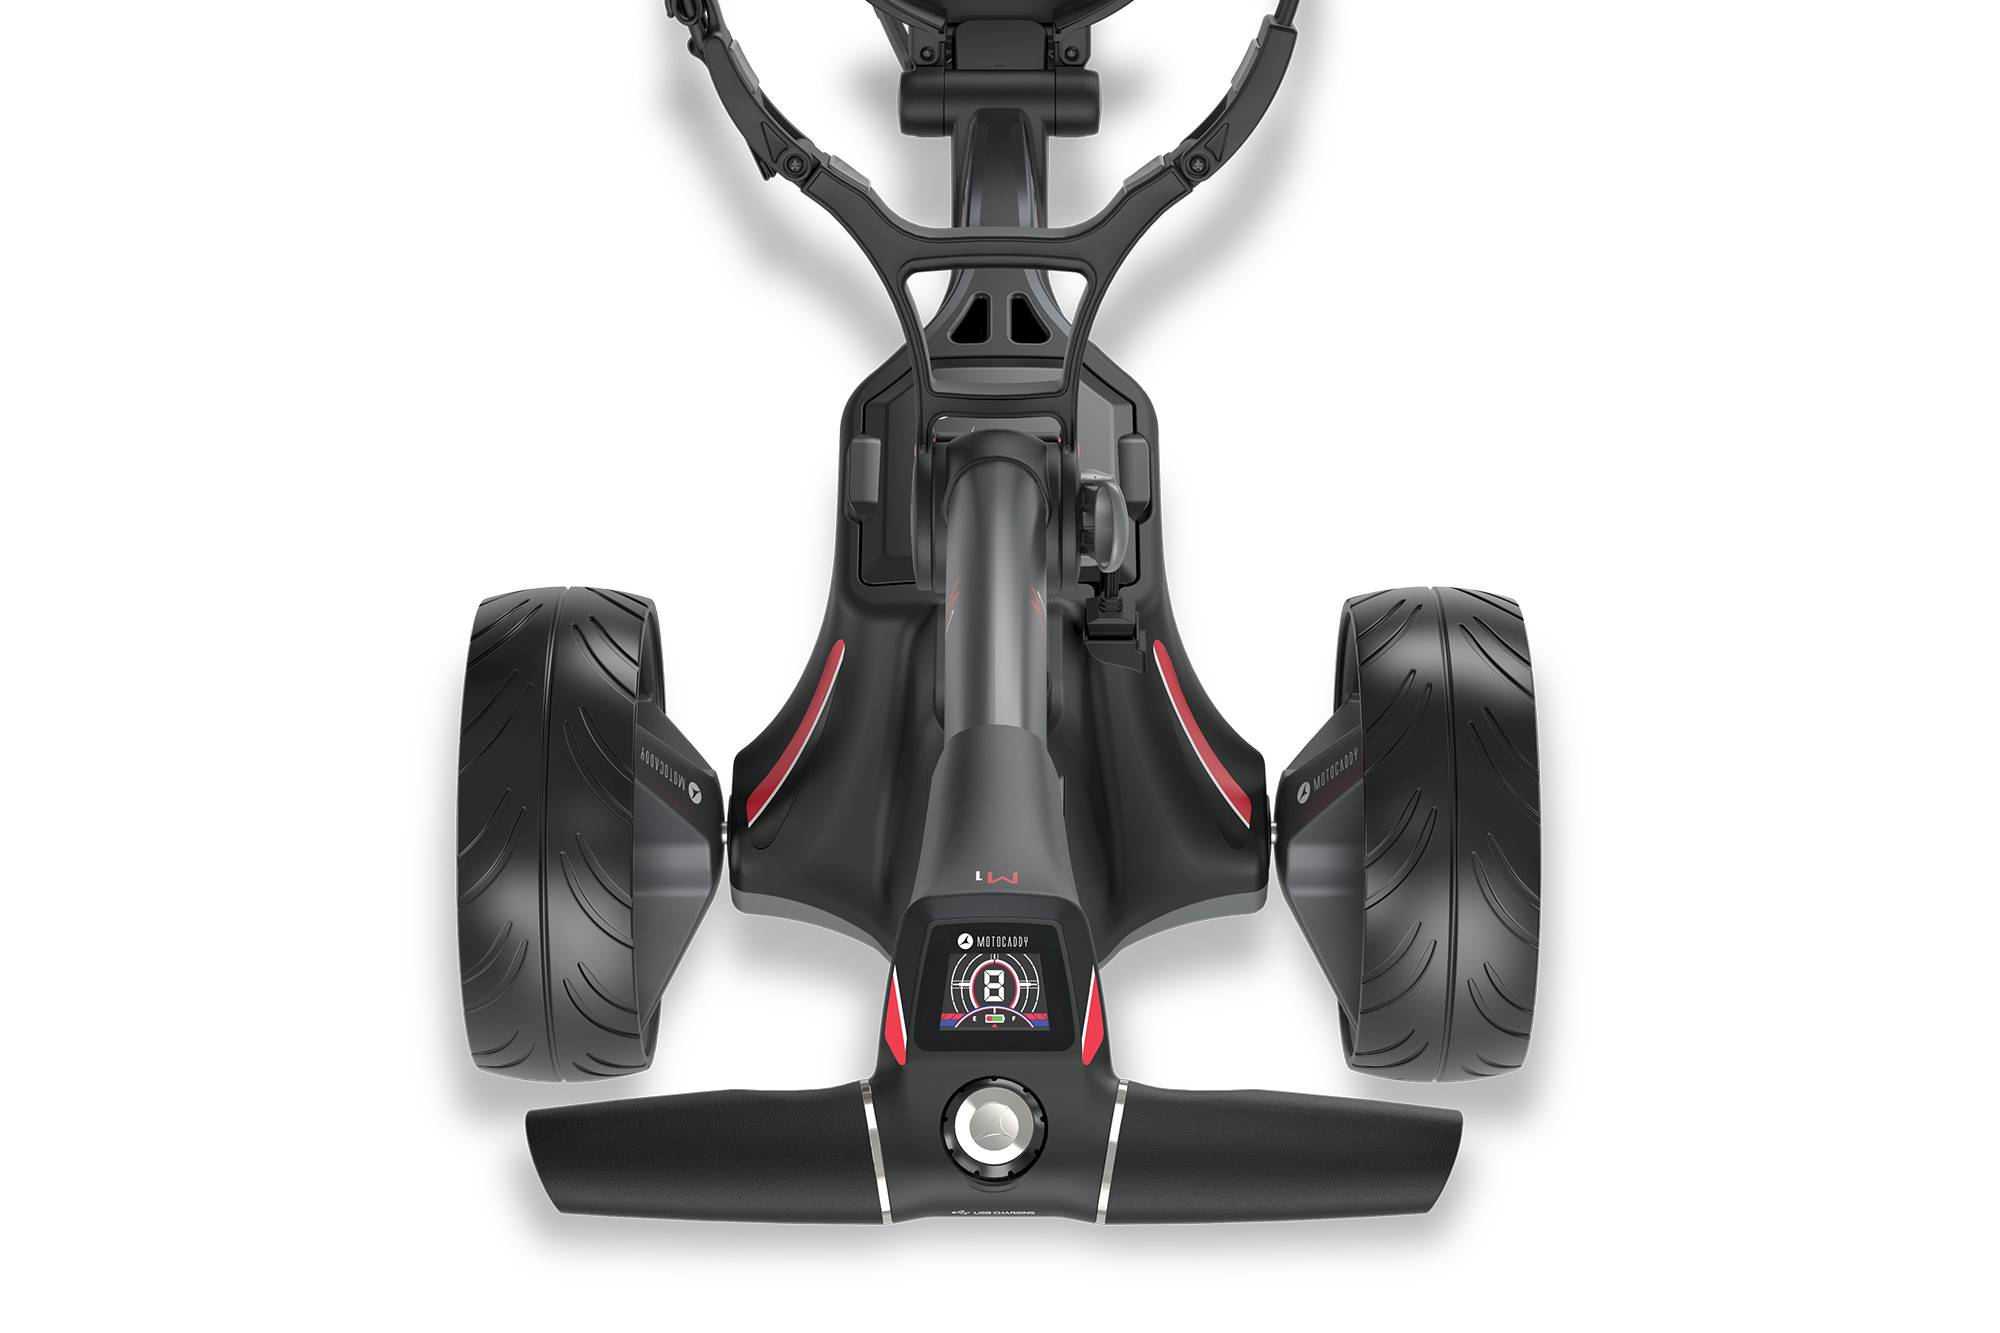 Motocaddy M1 trolley review